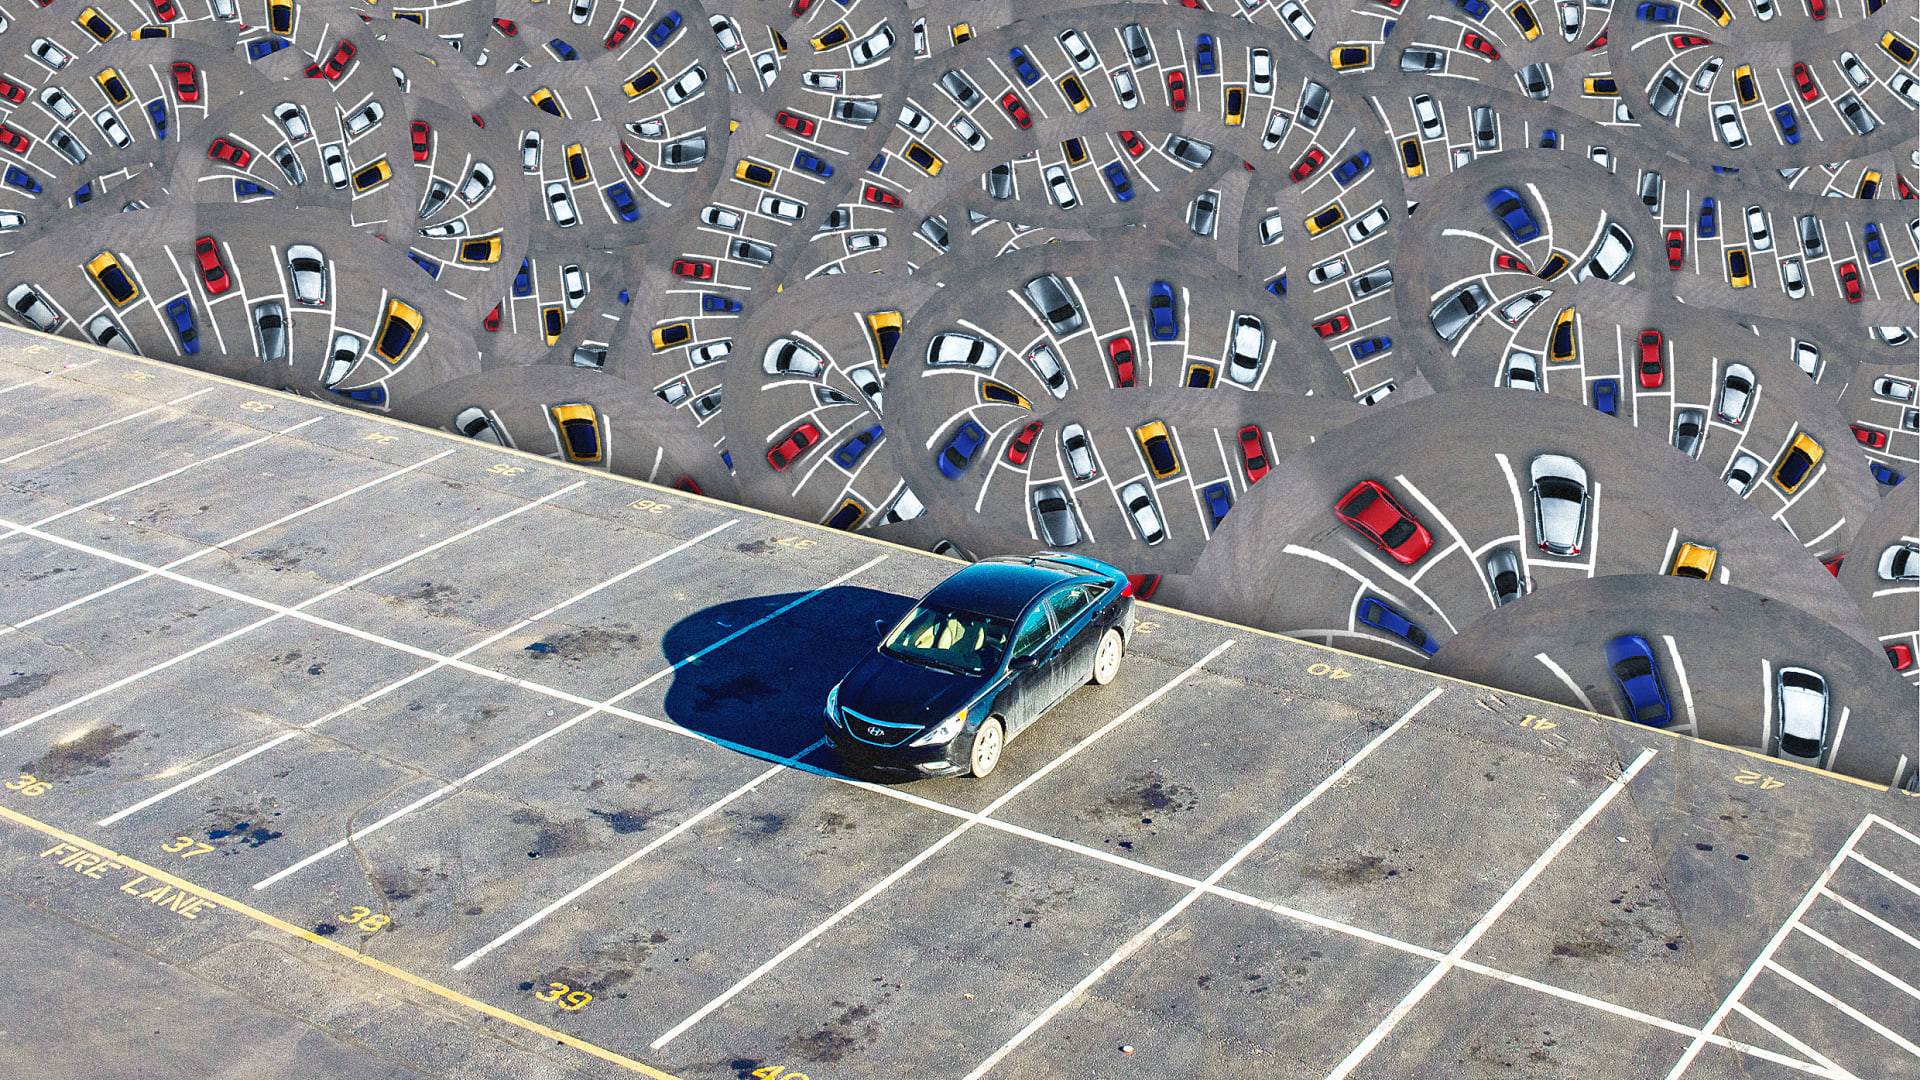 America has eight parking spaces for every car. Here’s how cities are rethinking that land